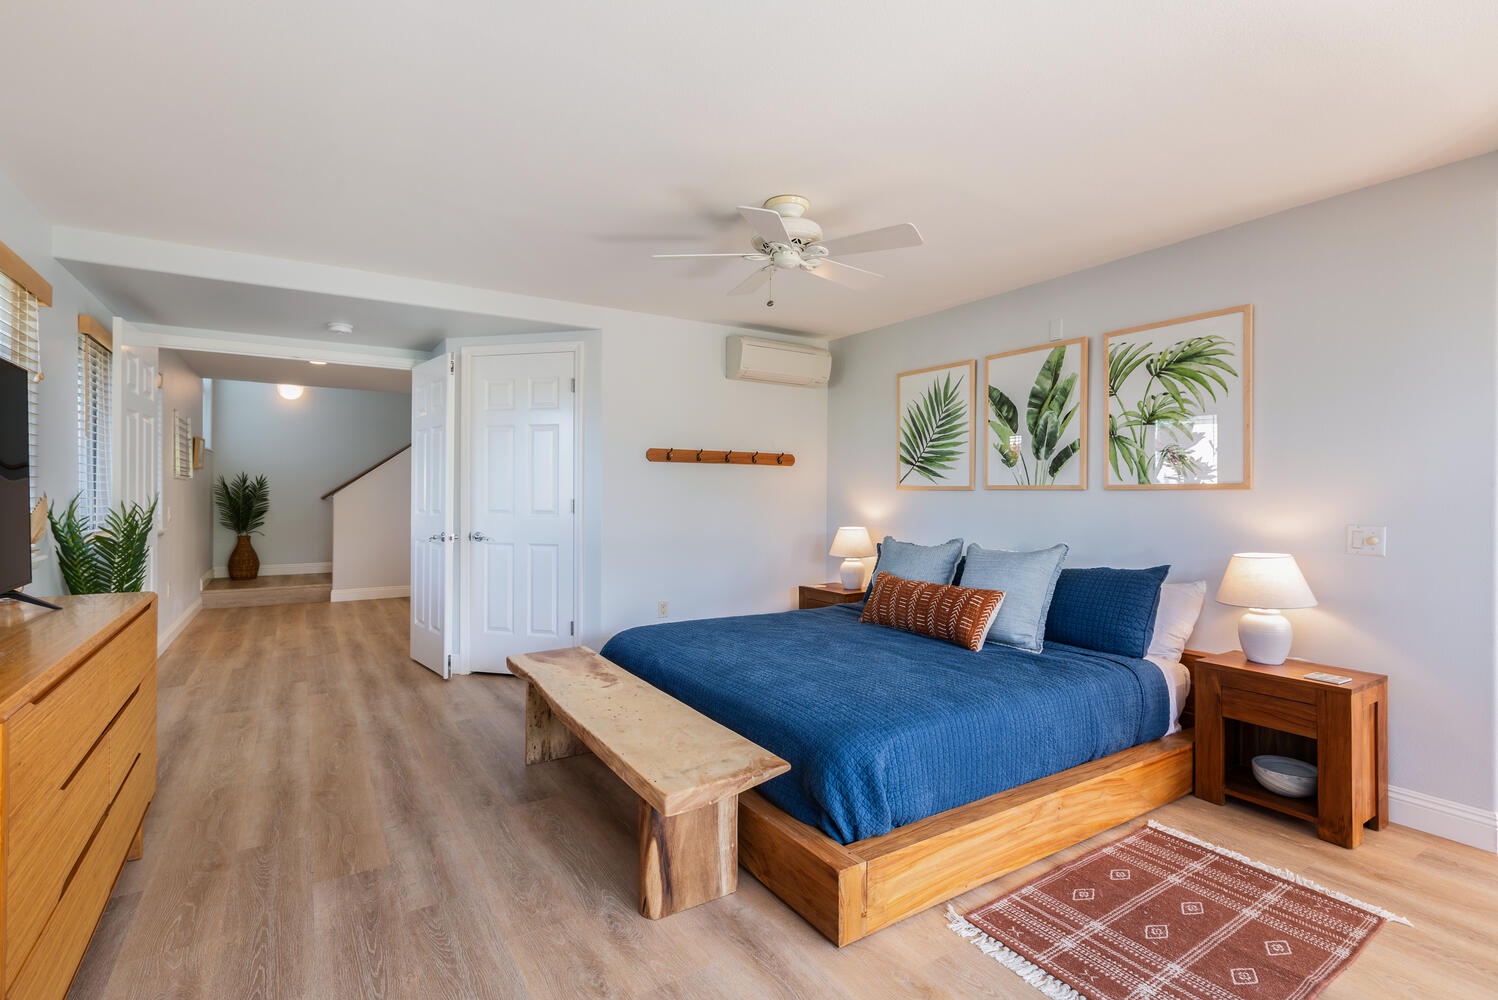 Princeville Vacation Rentals, Sea Glass - Spacious lower-level primary suite.